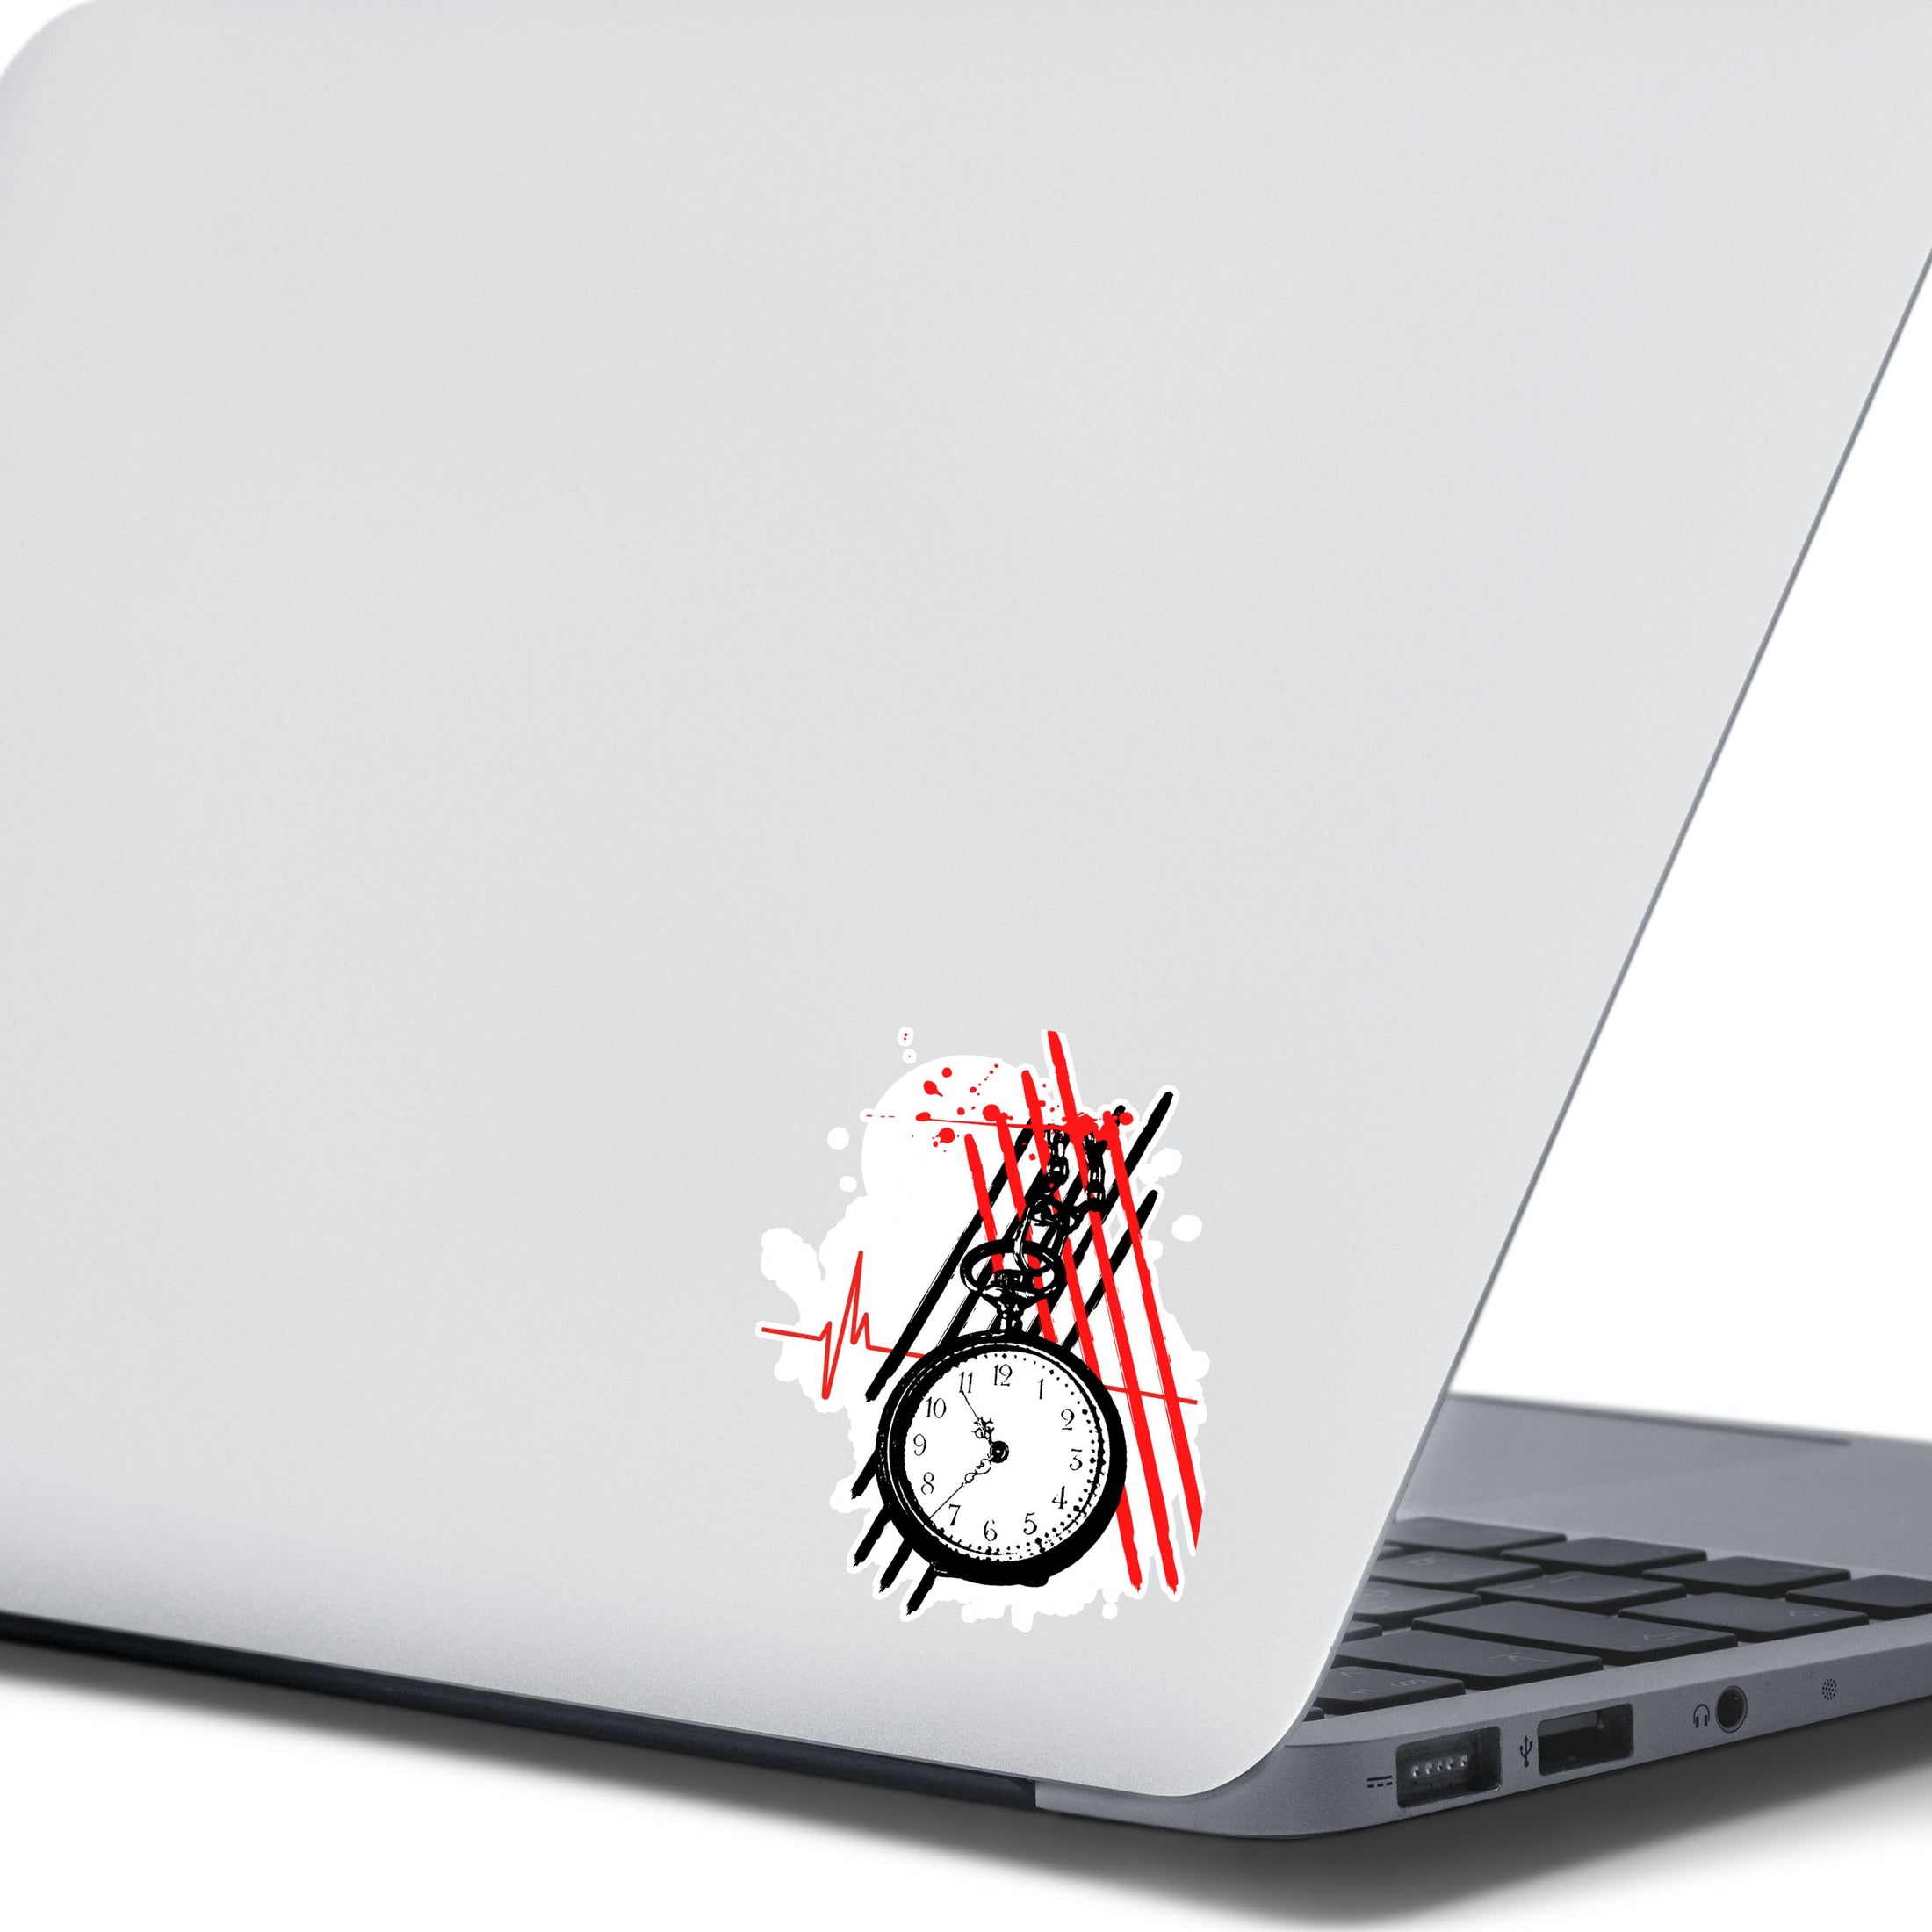 Trash Polka uses red, black, and white with a combination of abstract, surrealistic, and realistic images, and this individual die-cut sticker features a black and white pocket watch with red and black stripes behind.  This image shows the trash polka pocket watch sticker on the back of an open laptop.